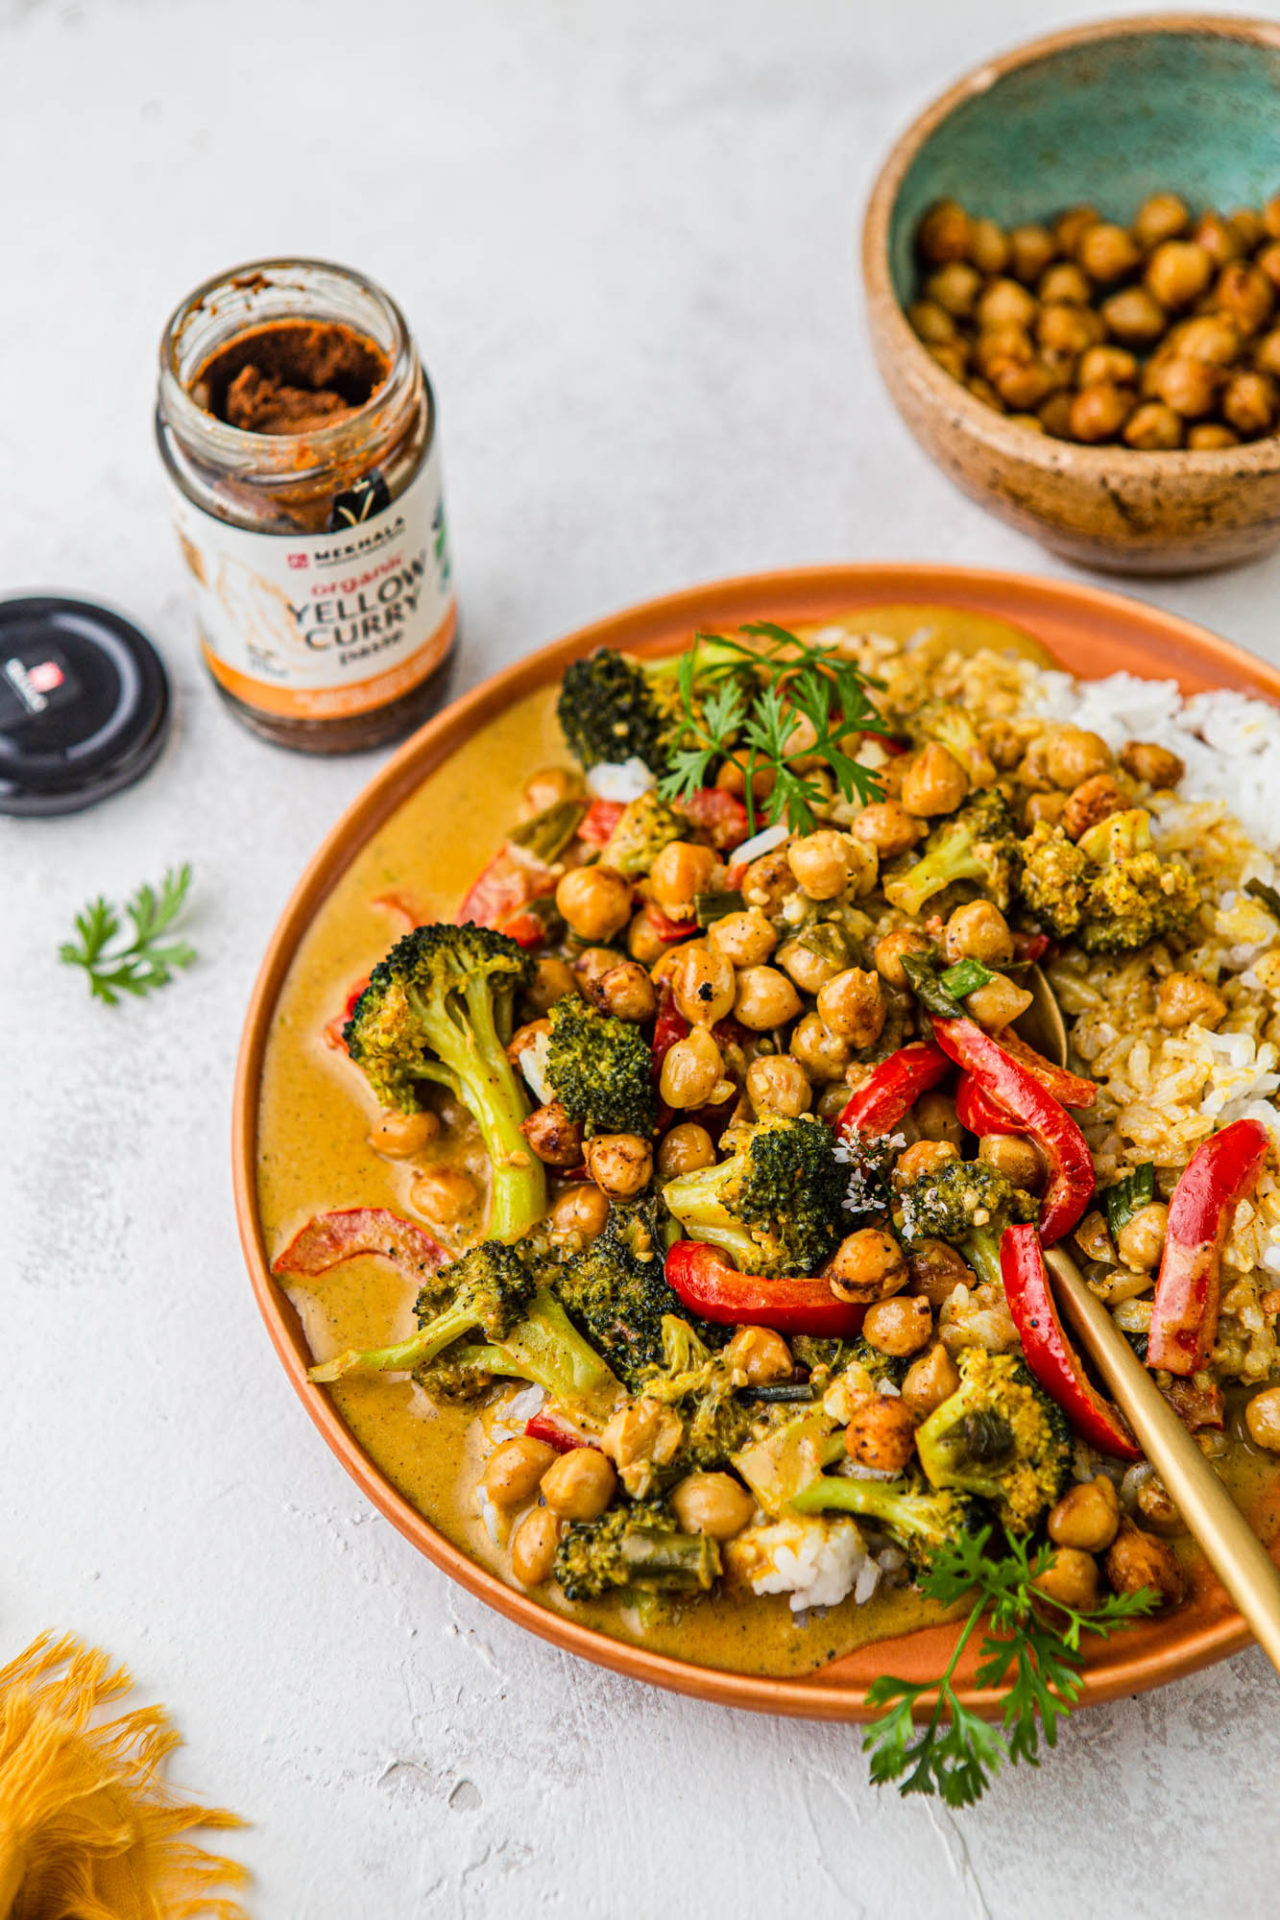 Vegan Thai Yellow Coconut Curry with Chickpeas